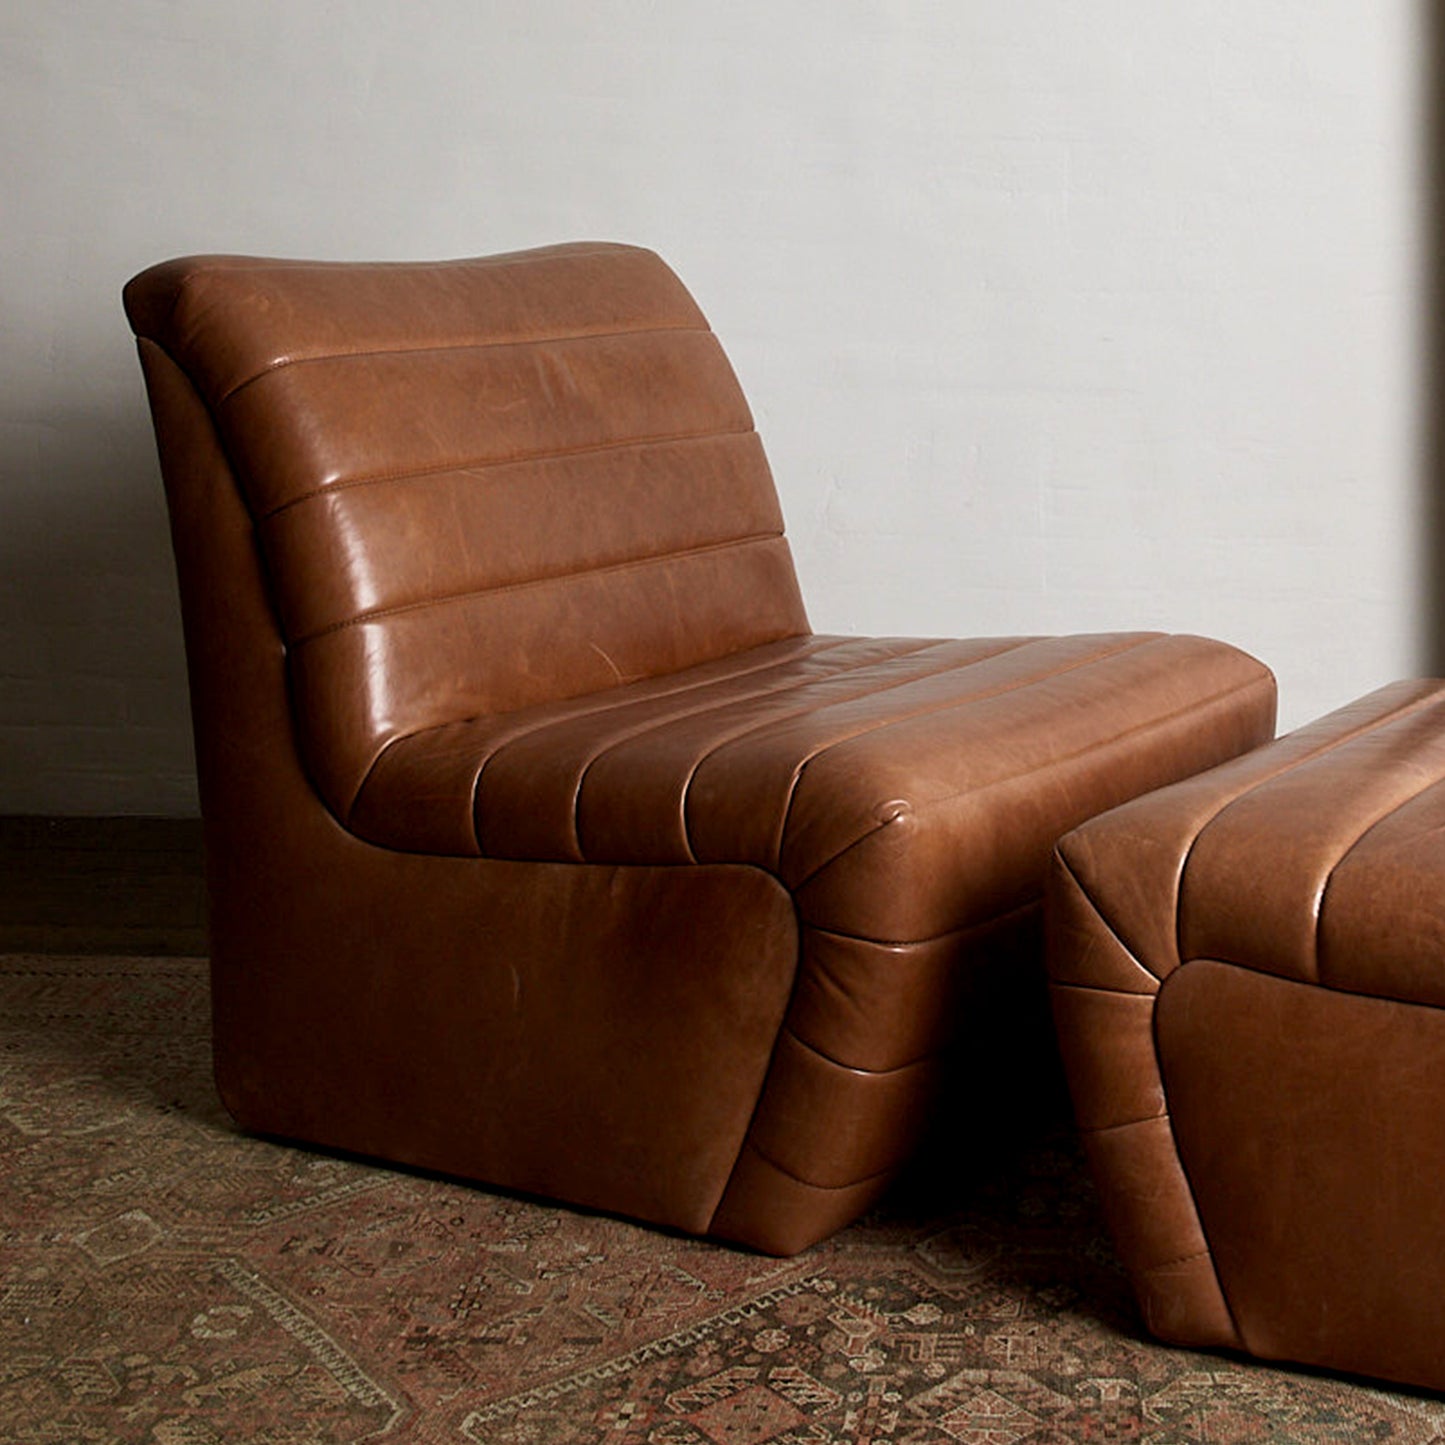 Brunoy Leather Armless Chair